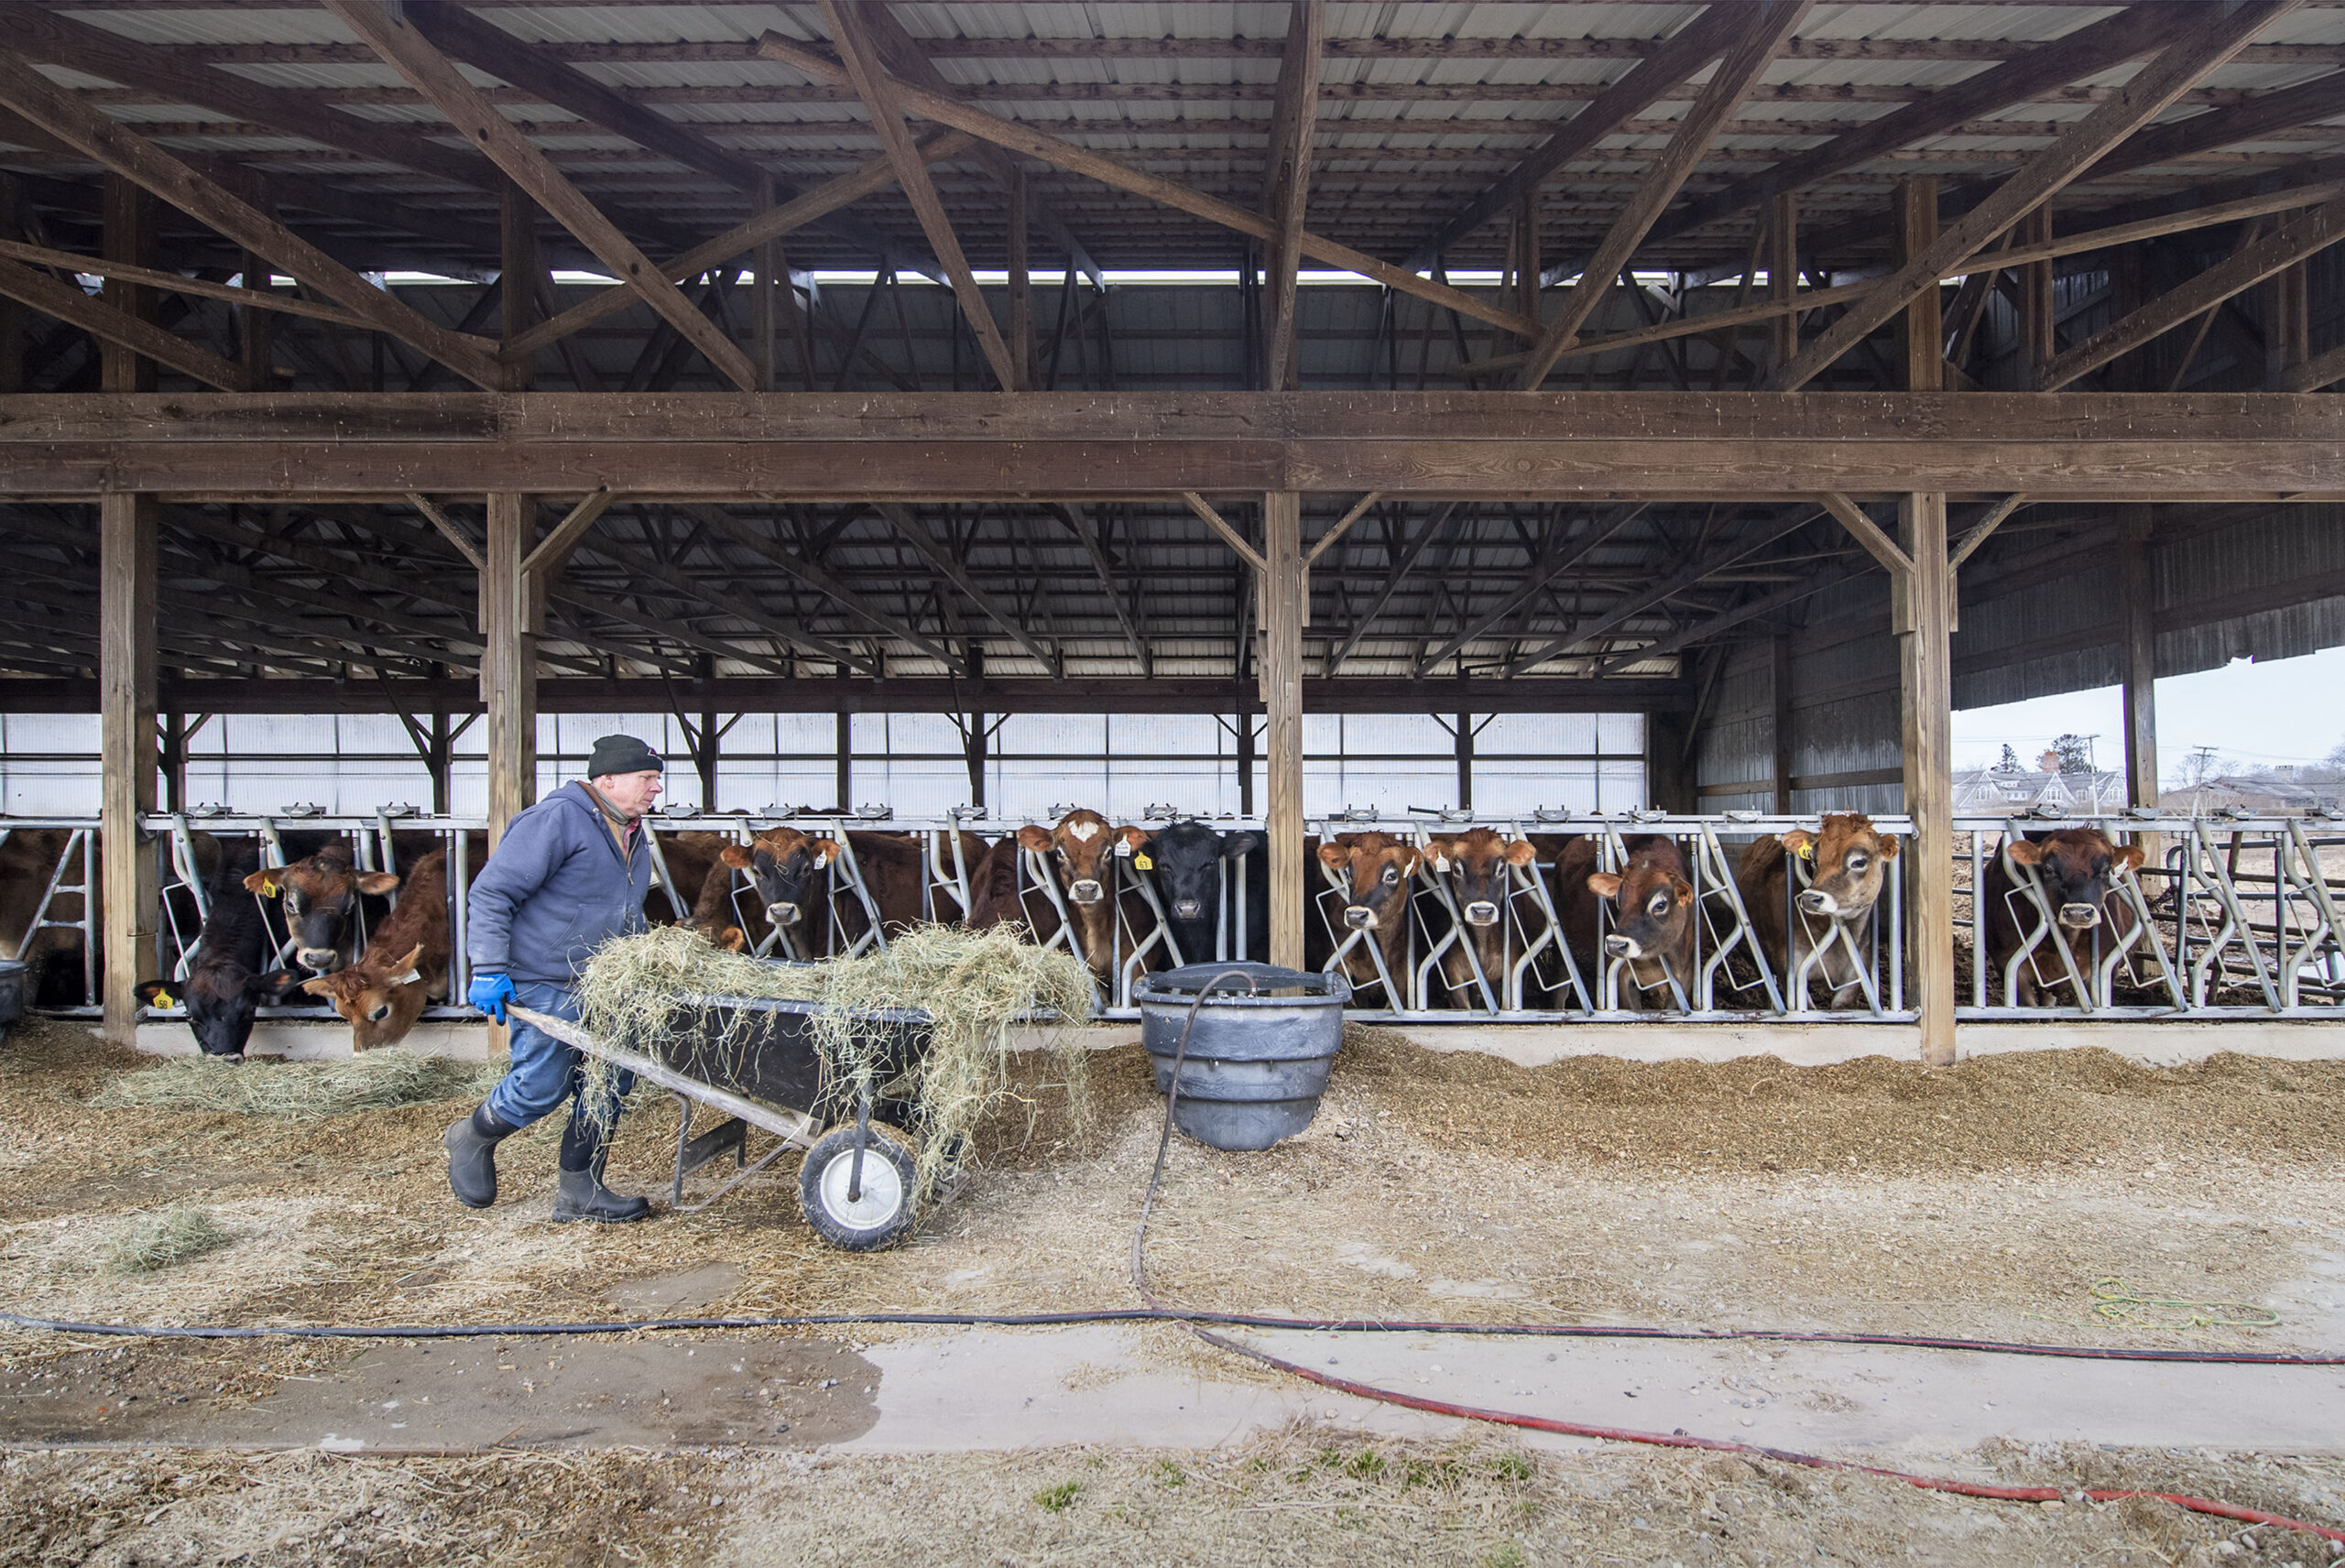 Herdsman Claes Cassel feeds the cows at the Mecox Bay Dairy on March 1st, 2022